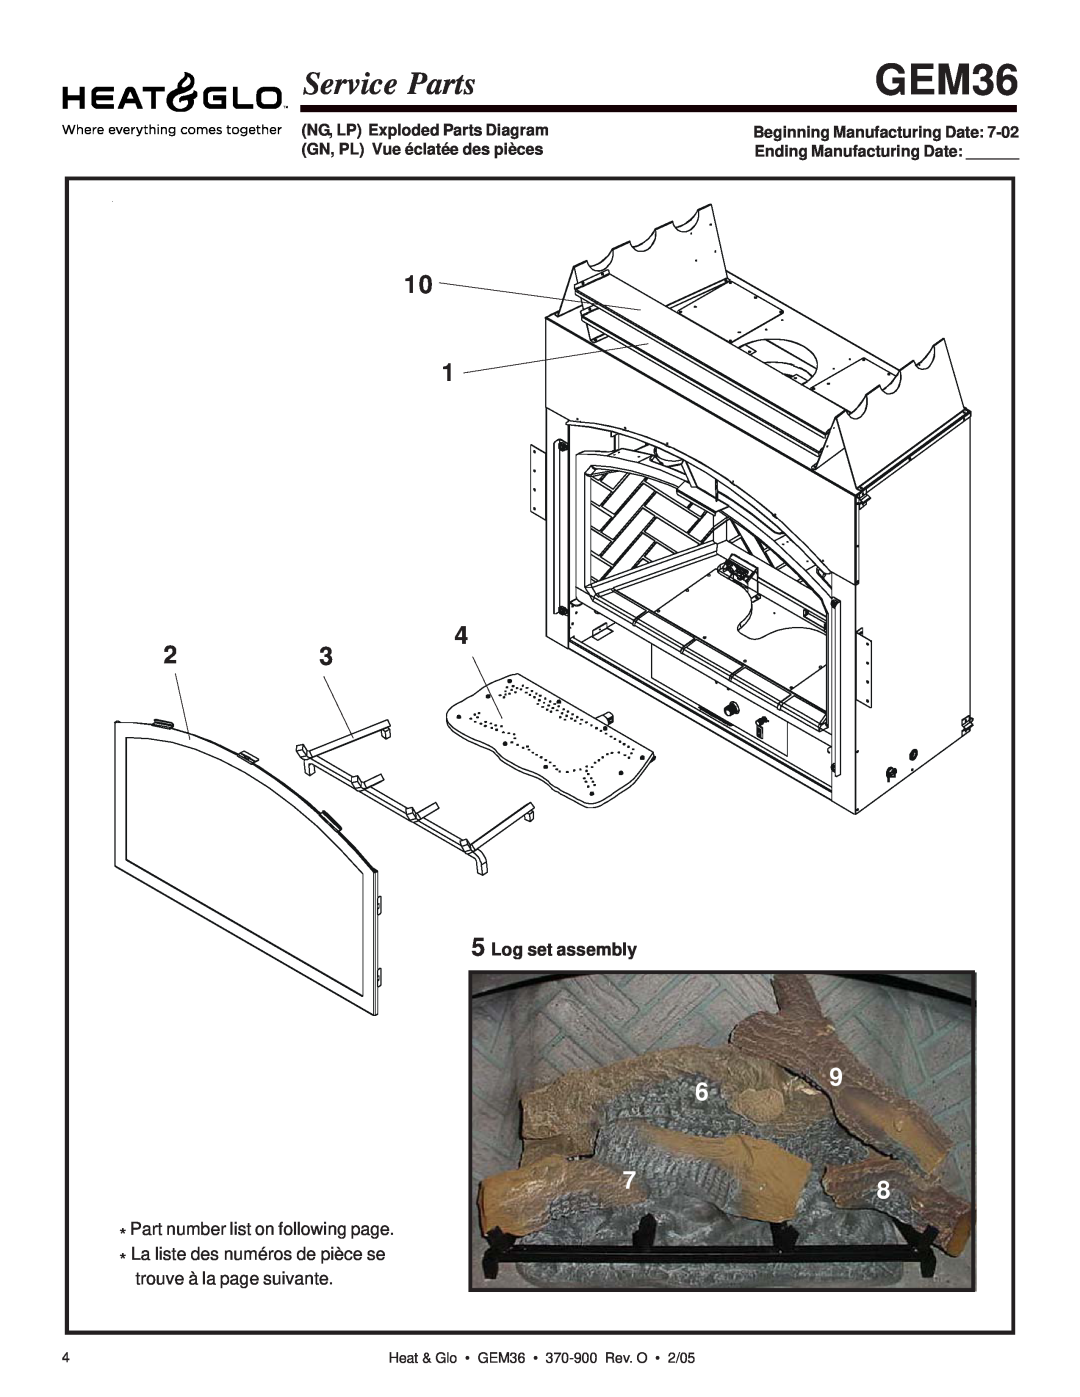 Heat & Glo LifeStyle GEM36 Service Parts, Log set assembly, NG, LP Exploded Parts Diagram, Beginning Manufacturing Date 